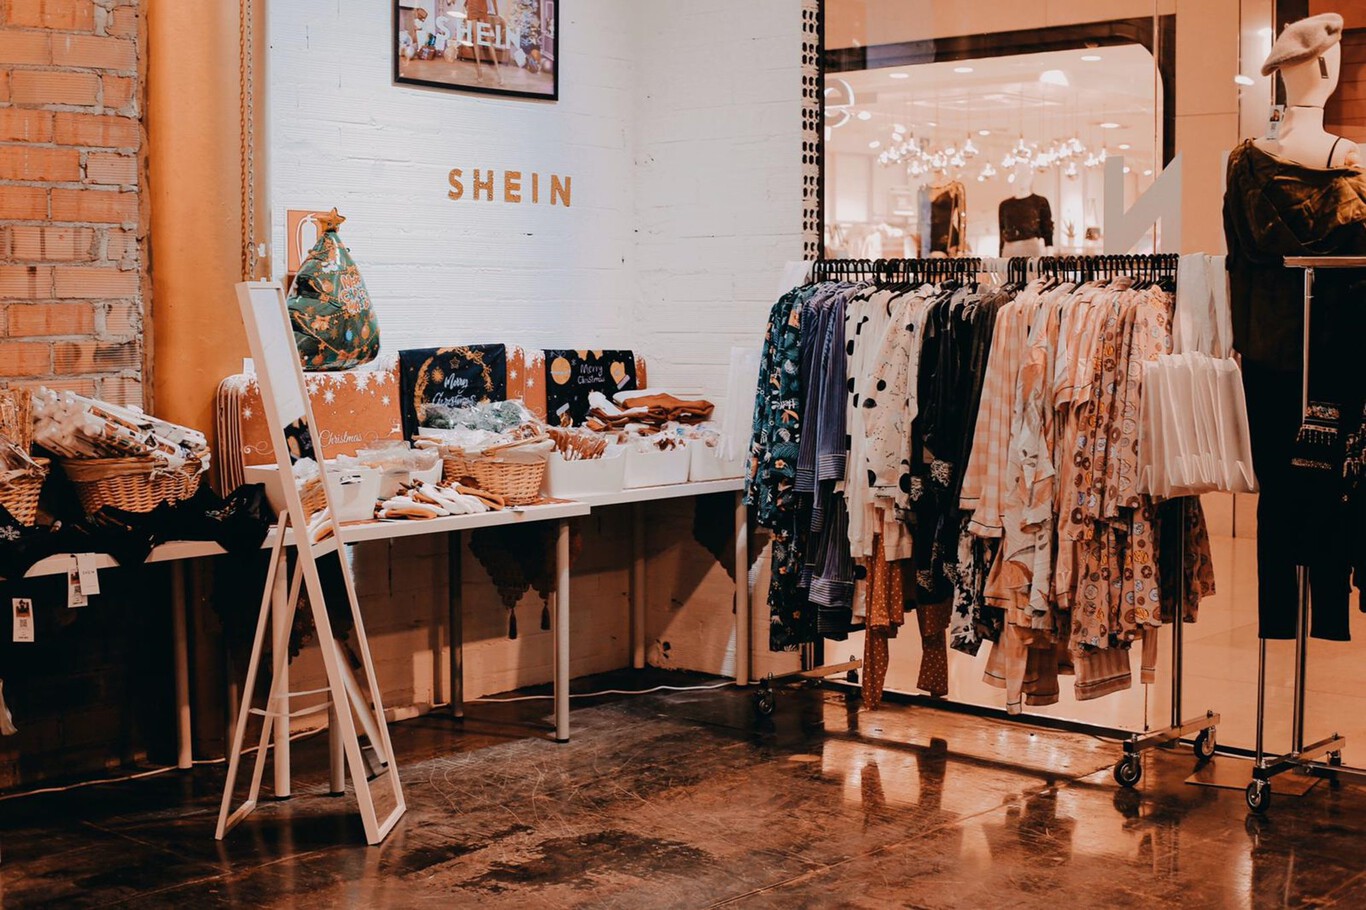 Shein is having such success as a brand that in Mexico they are already opening physical stores without a license